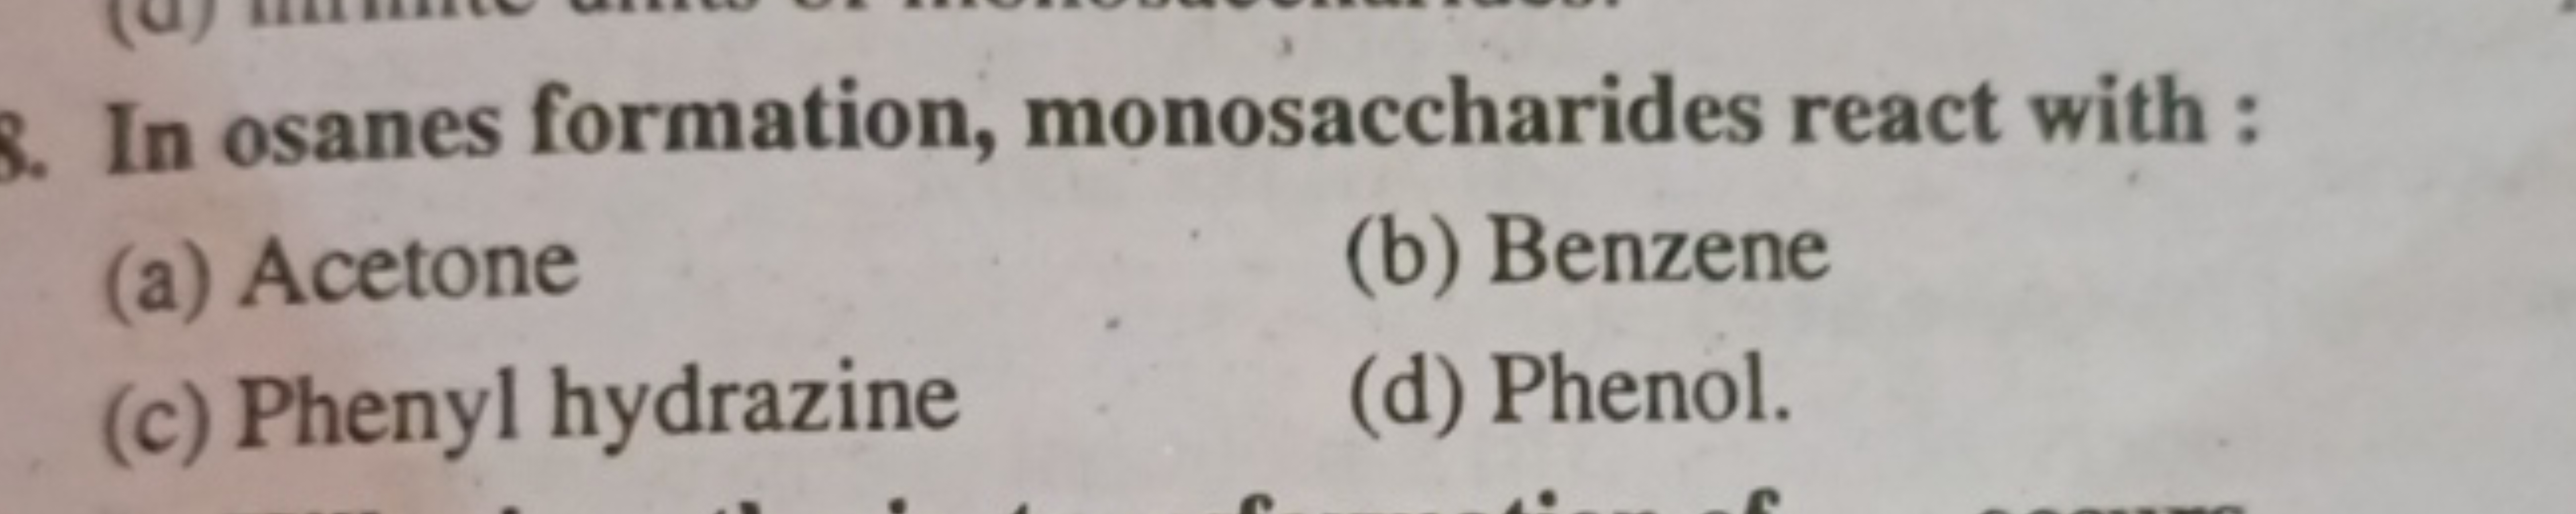 In osanes formation, monosaccharides react with :